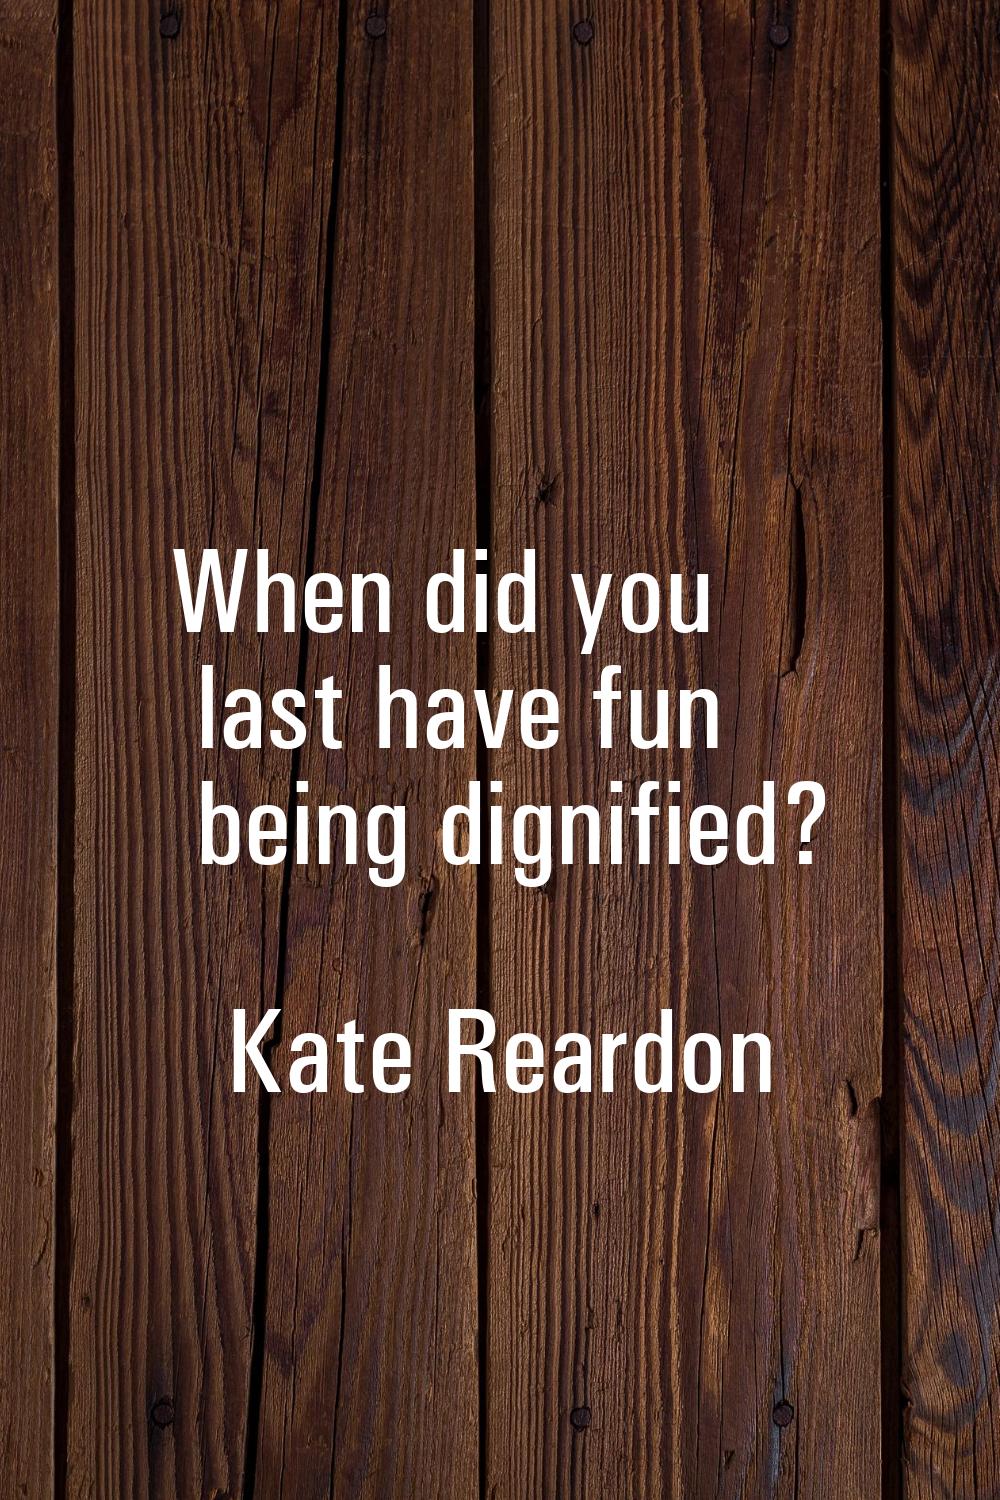 When did you last have fun being dignified?